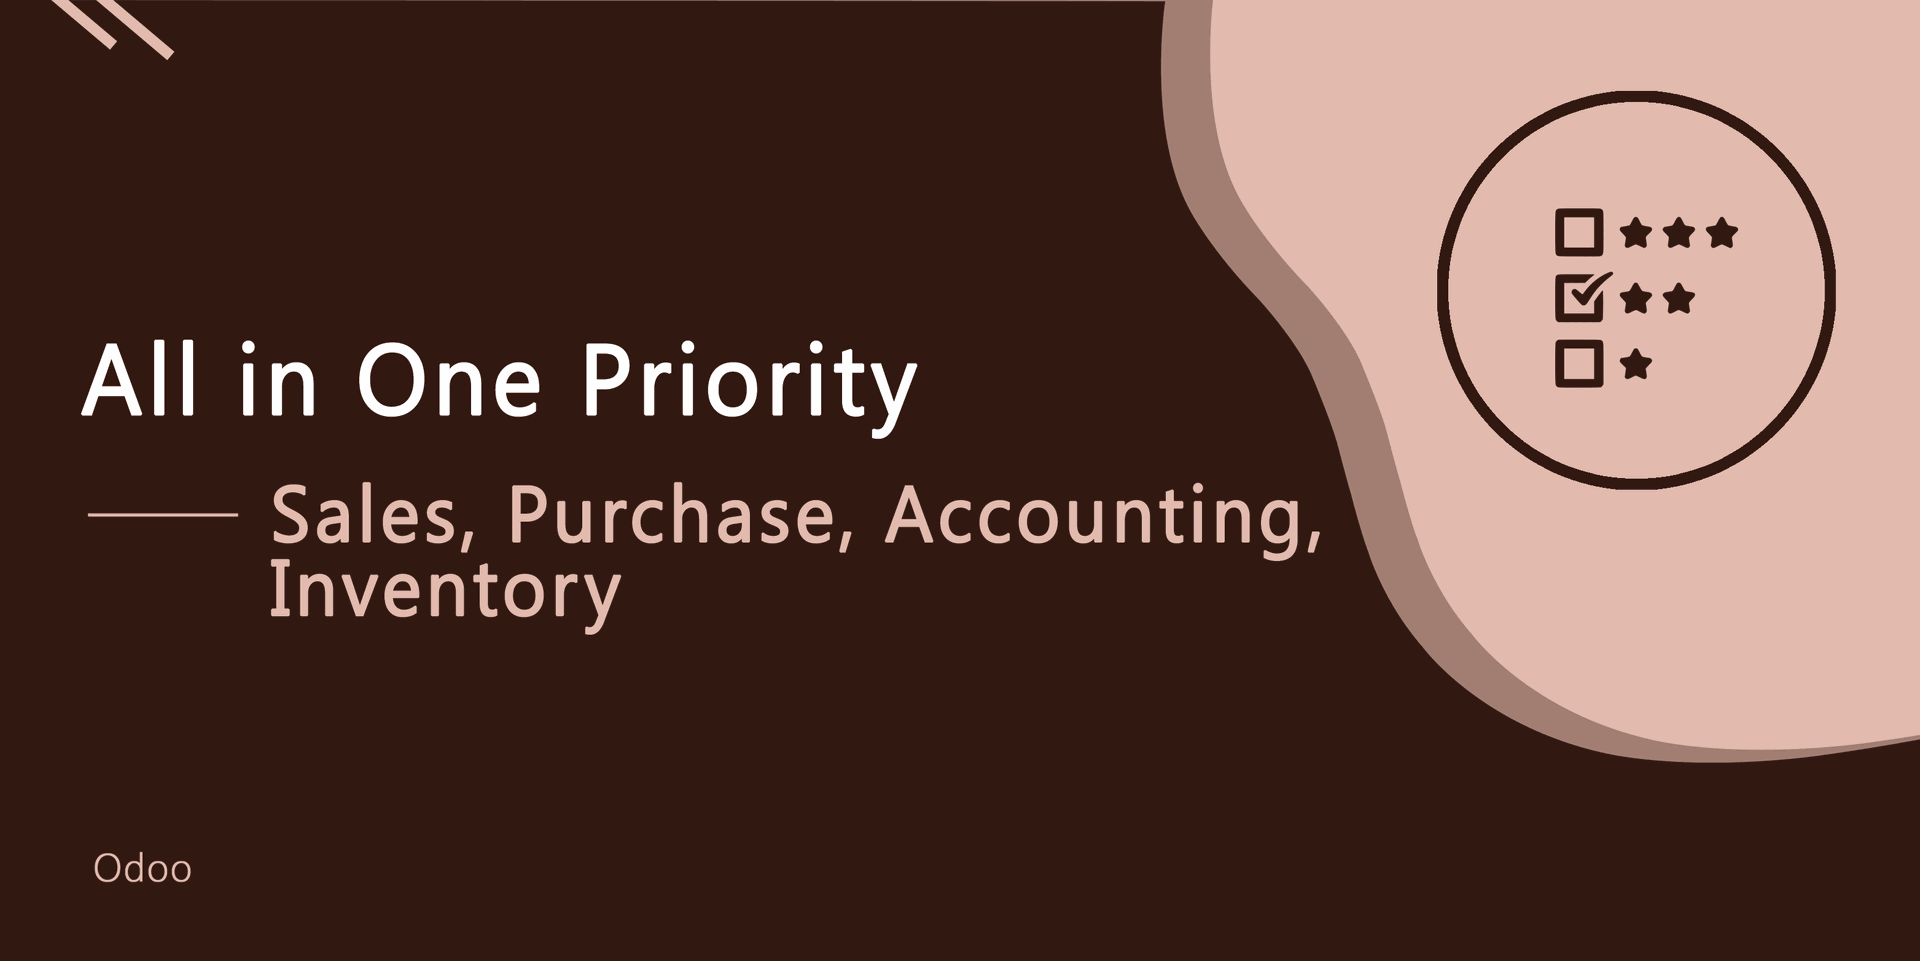 All in One Priority - Sale, Purchase, Account, Inventory